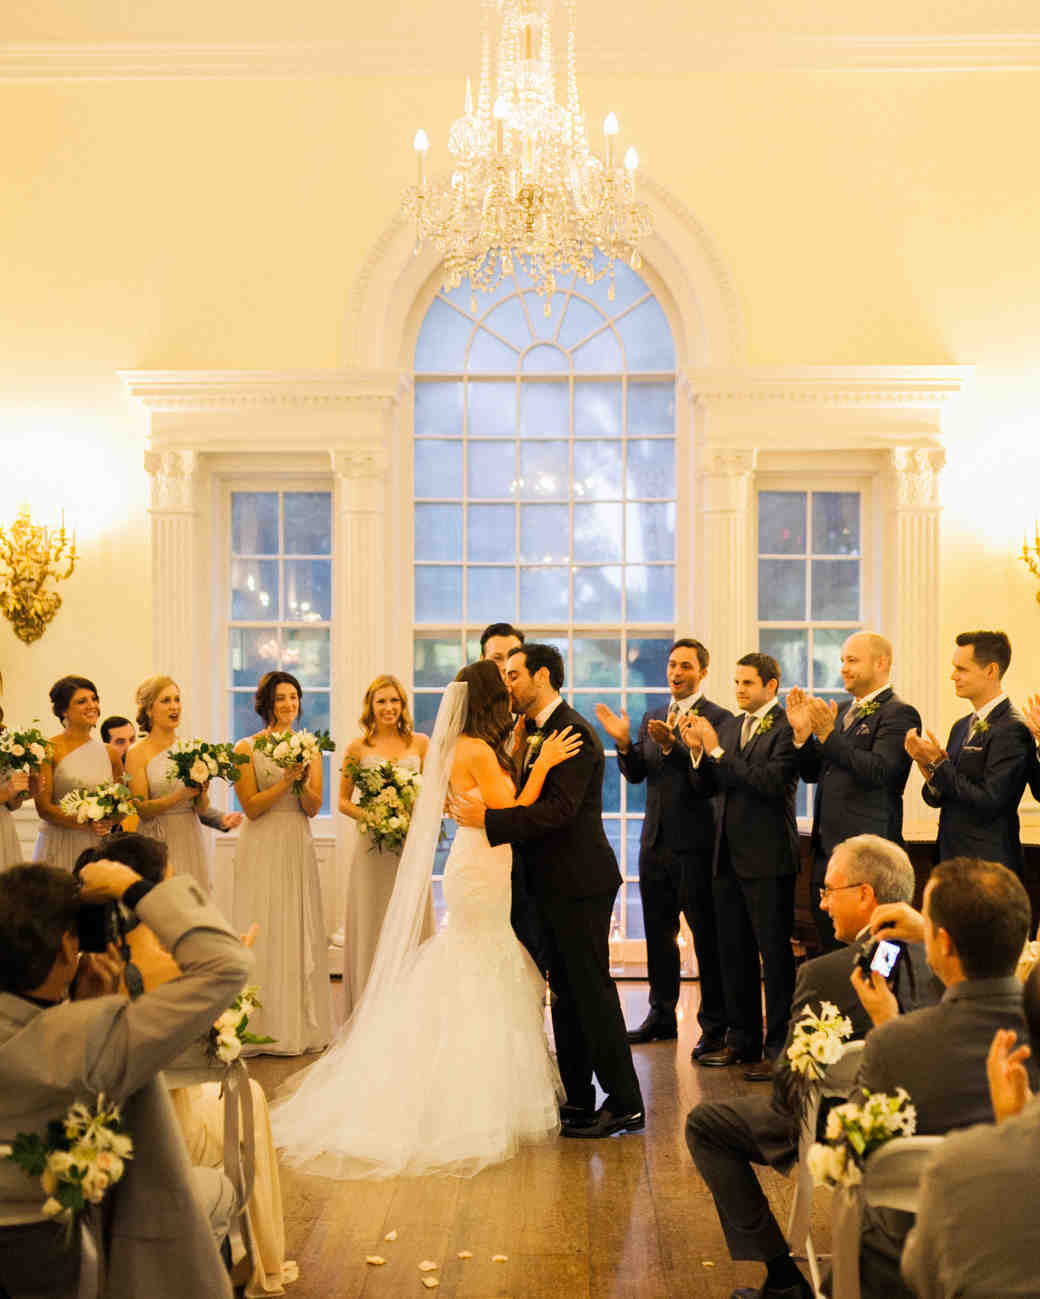 Jackie and Ross’s Elegant Nashville Wedding With a Surprise Ending ...